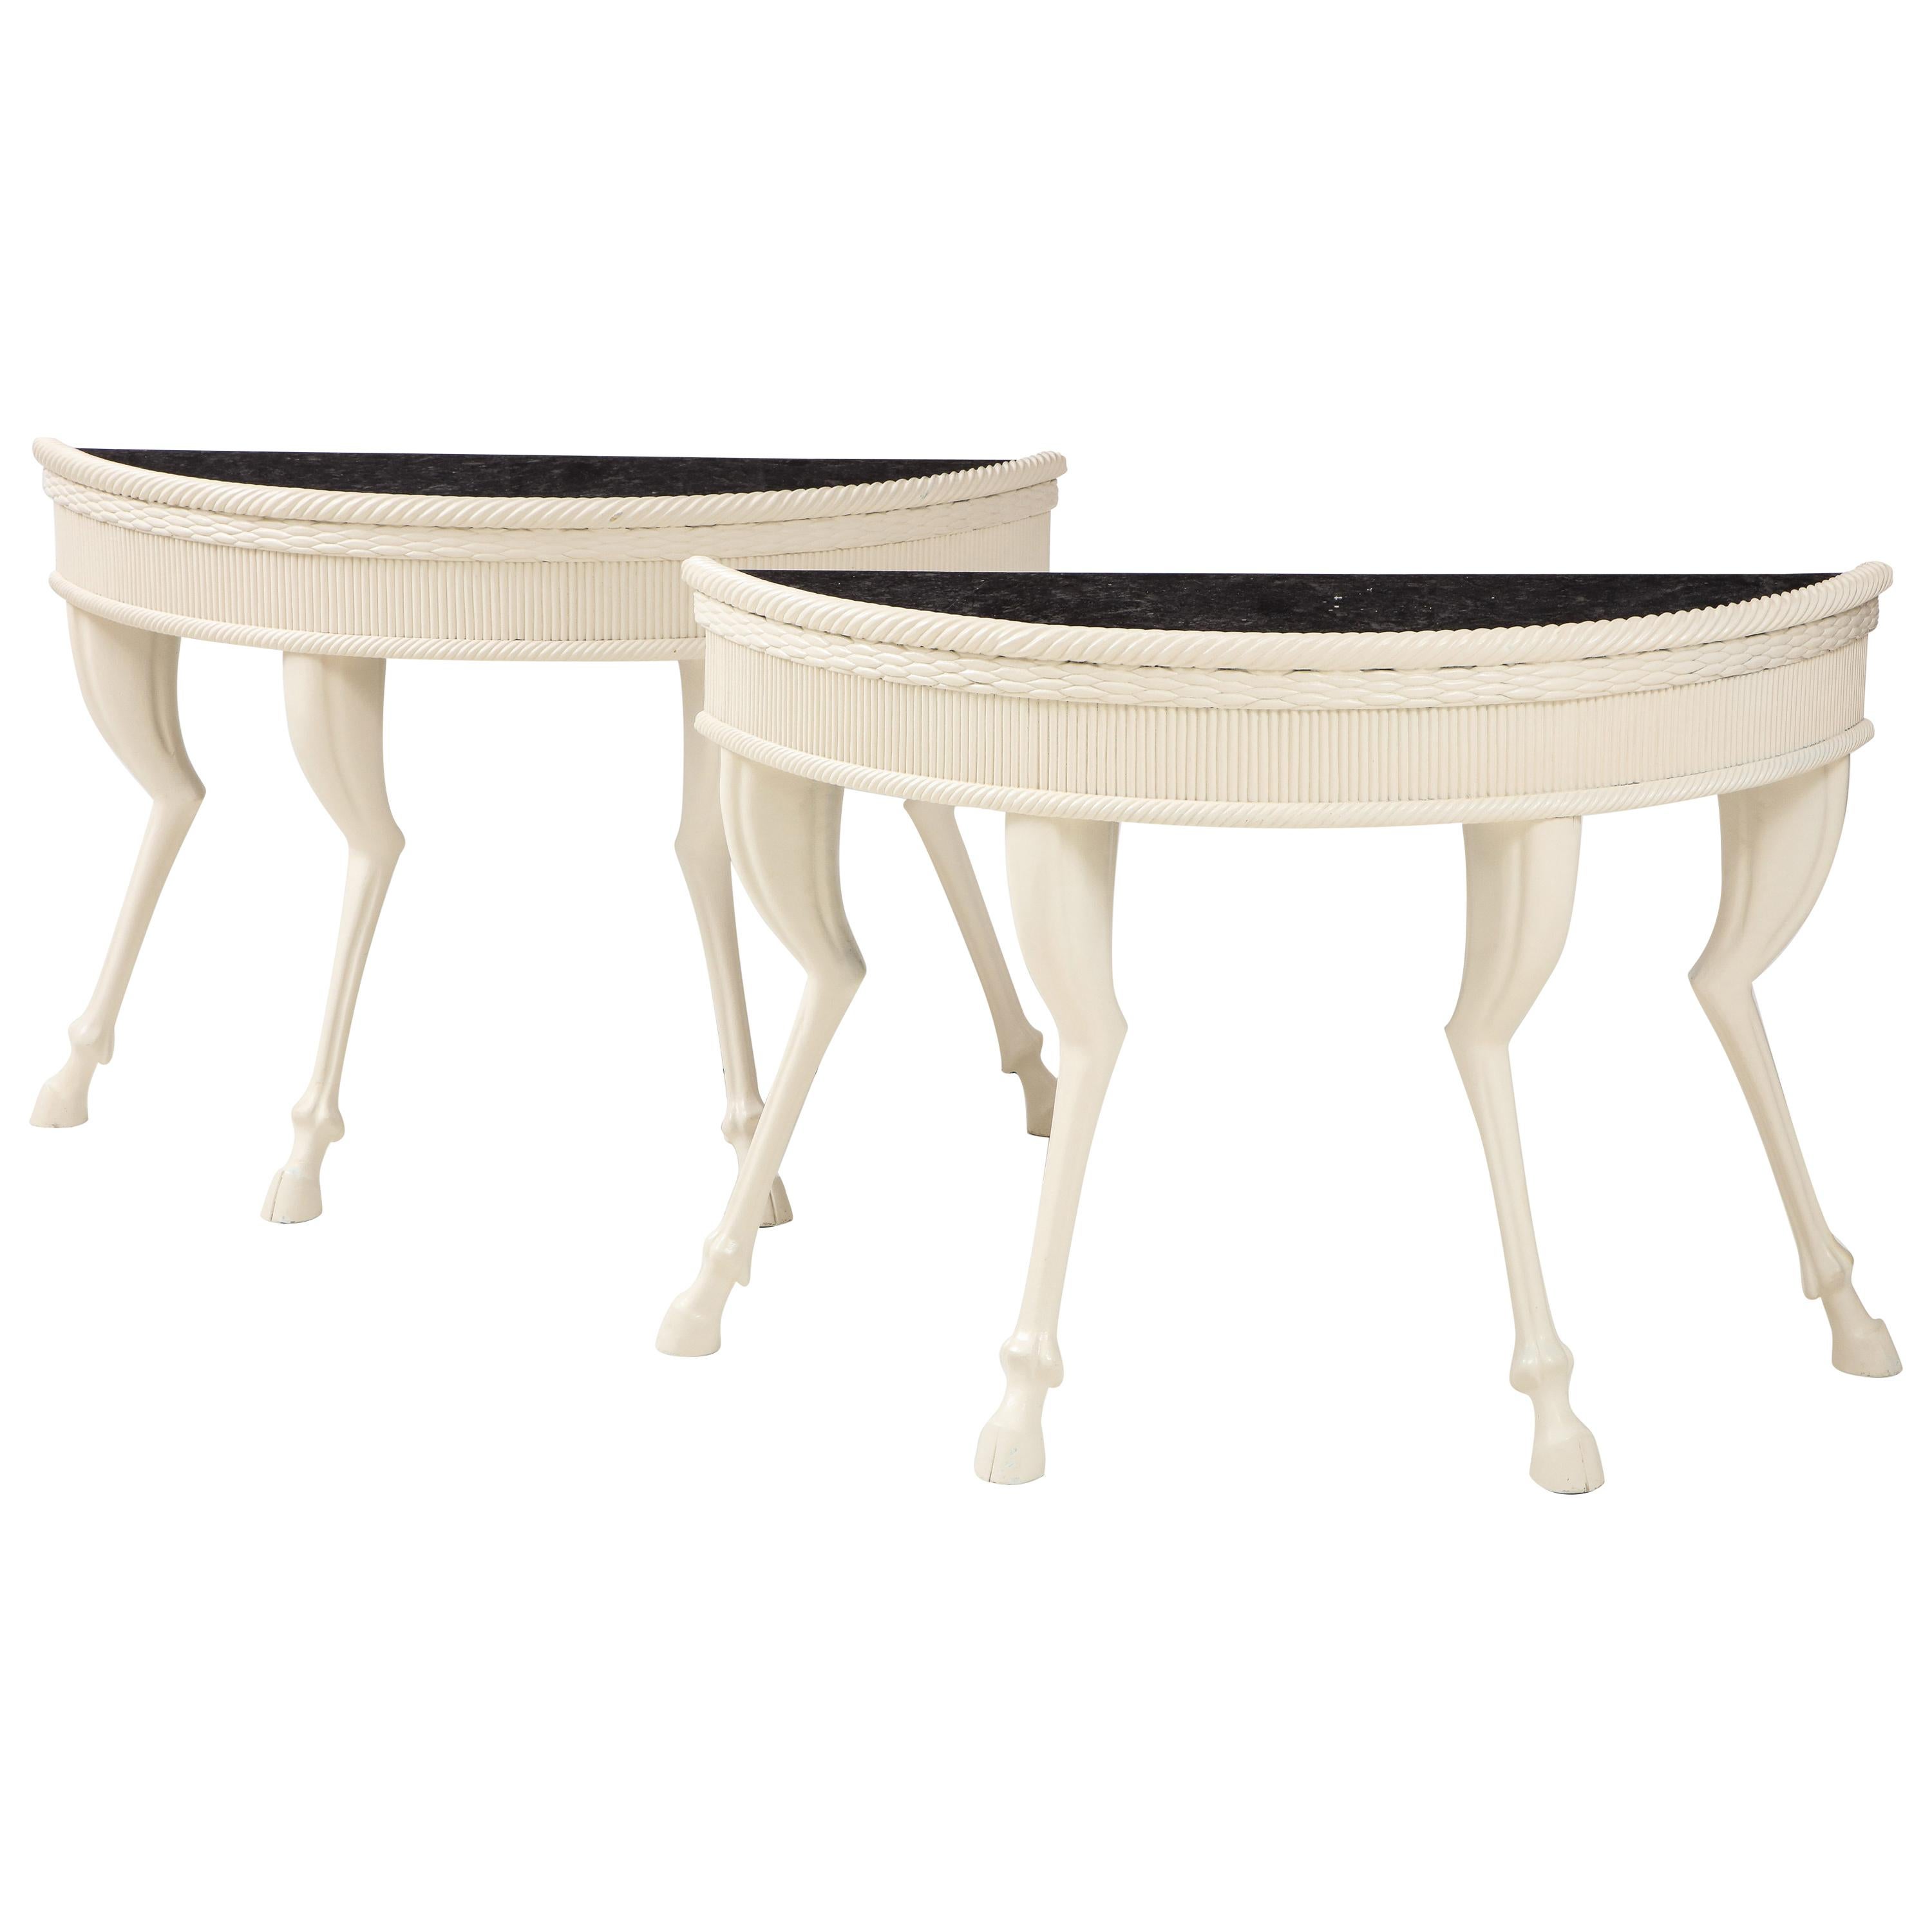 Pair of Demilune Hoof Foot Console Tables